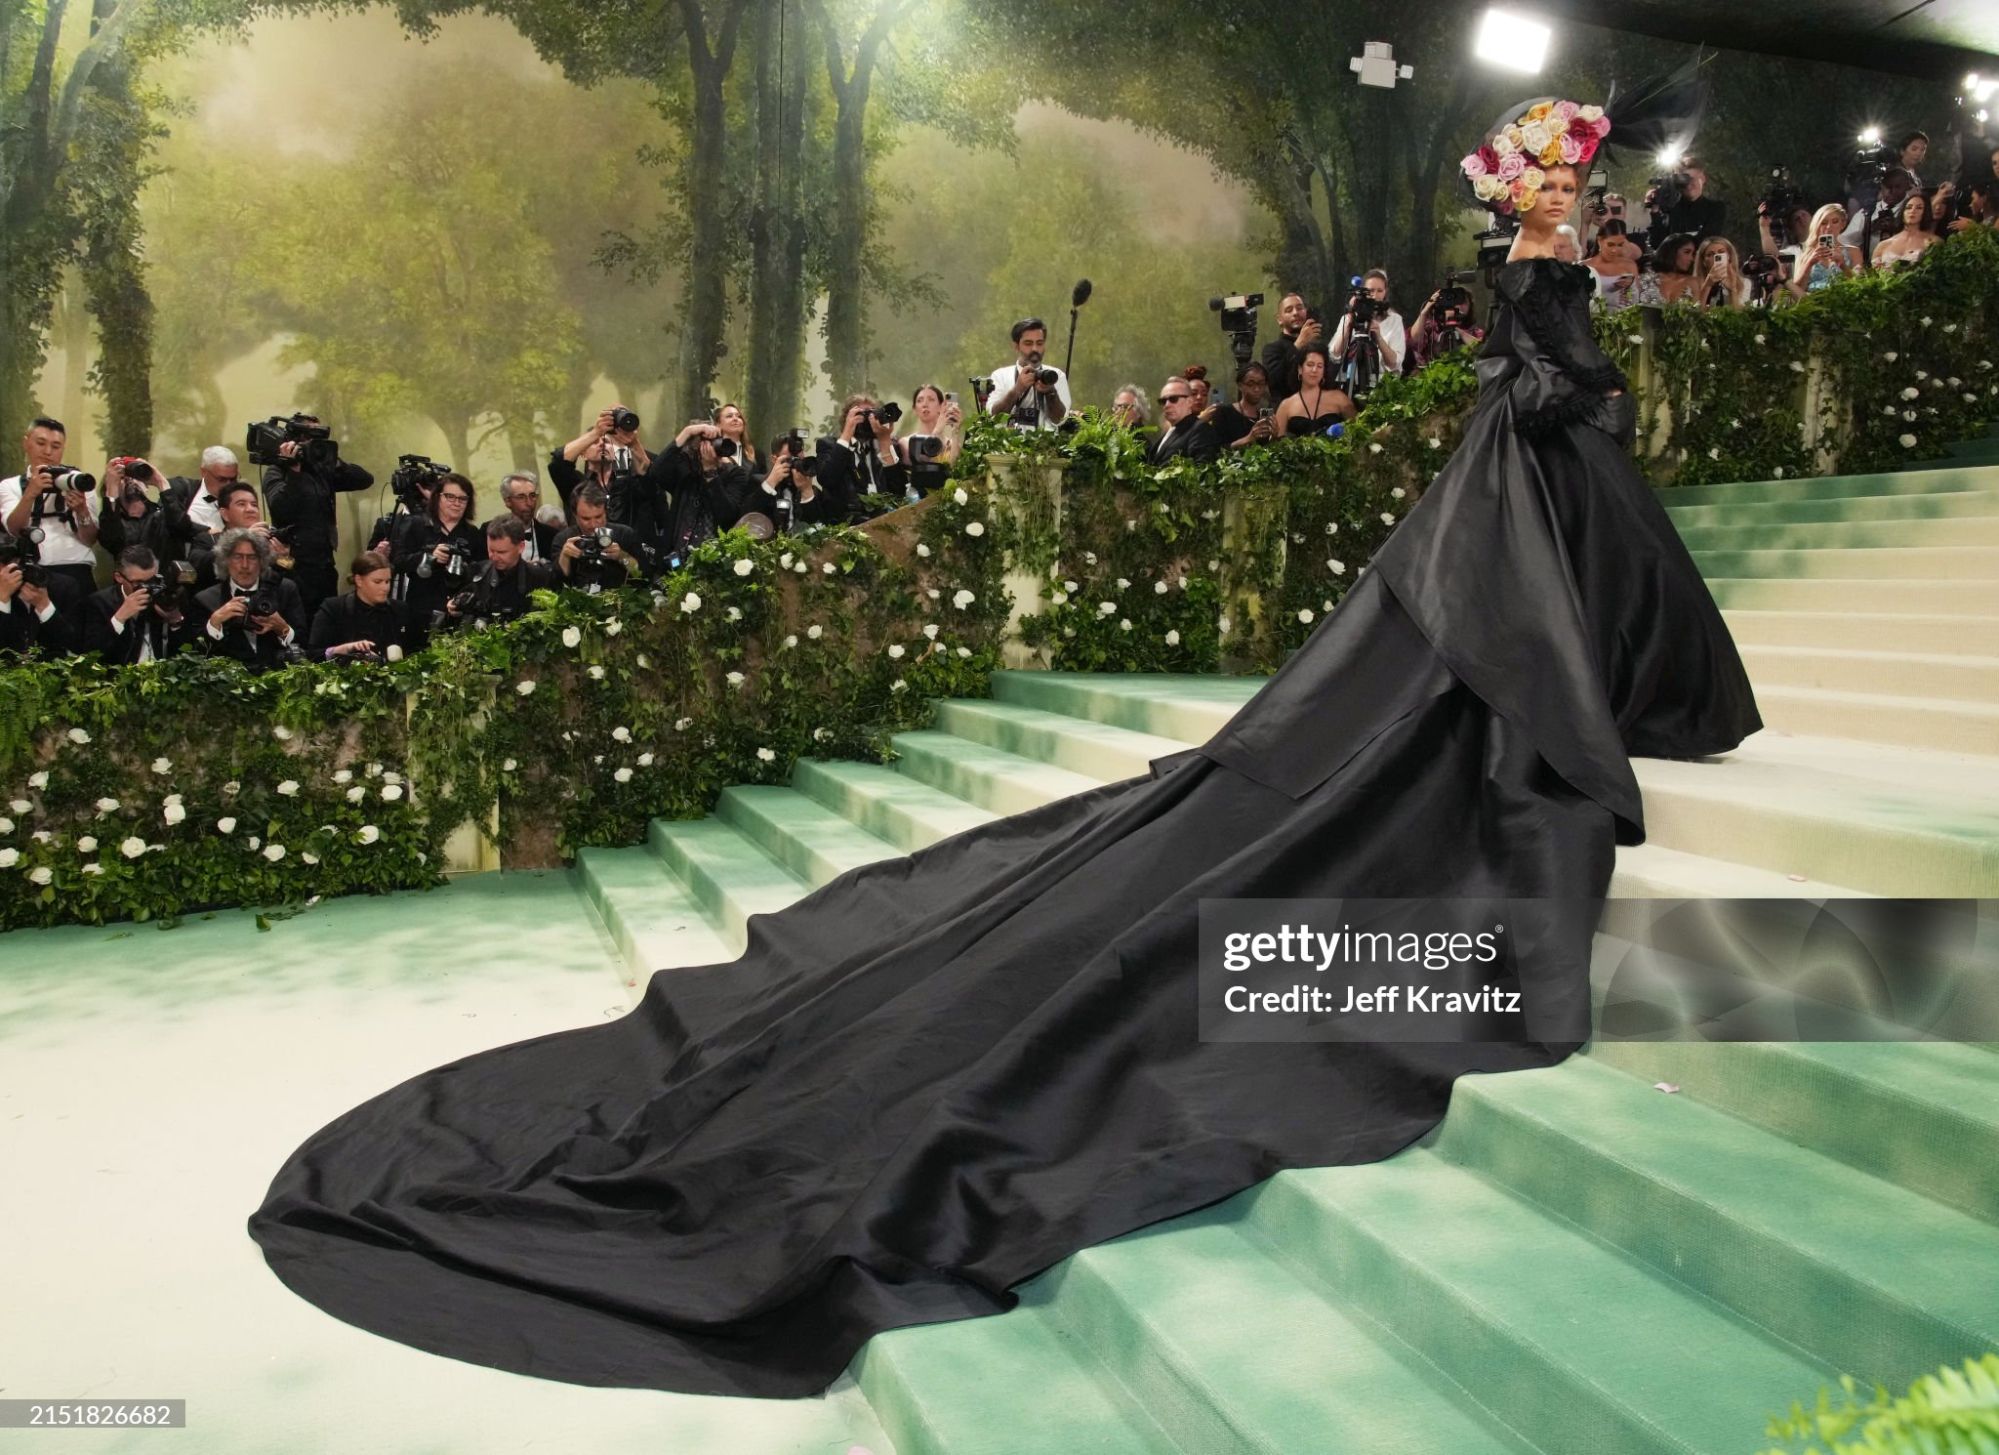 gettyimages-2151826682-2048x2048.jpg